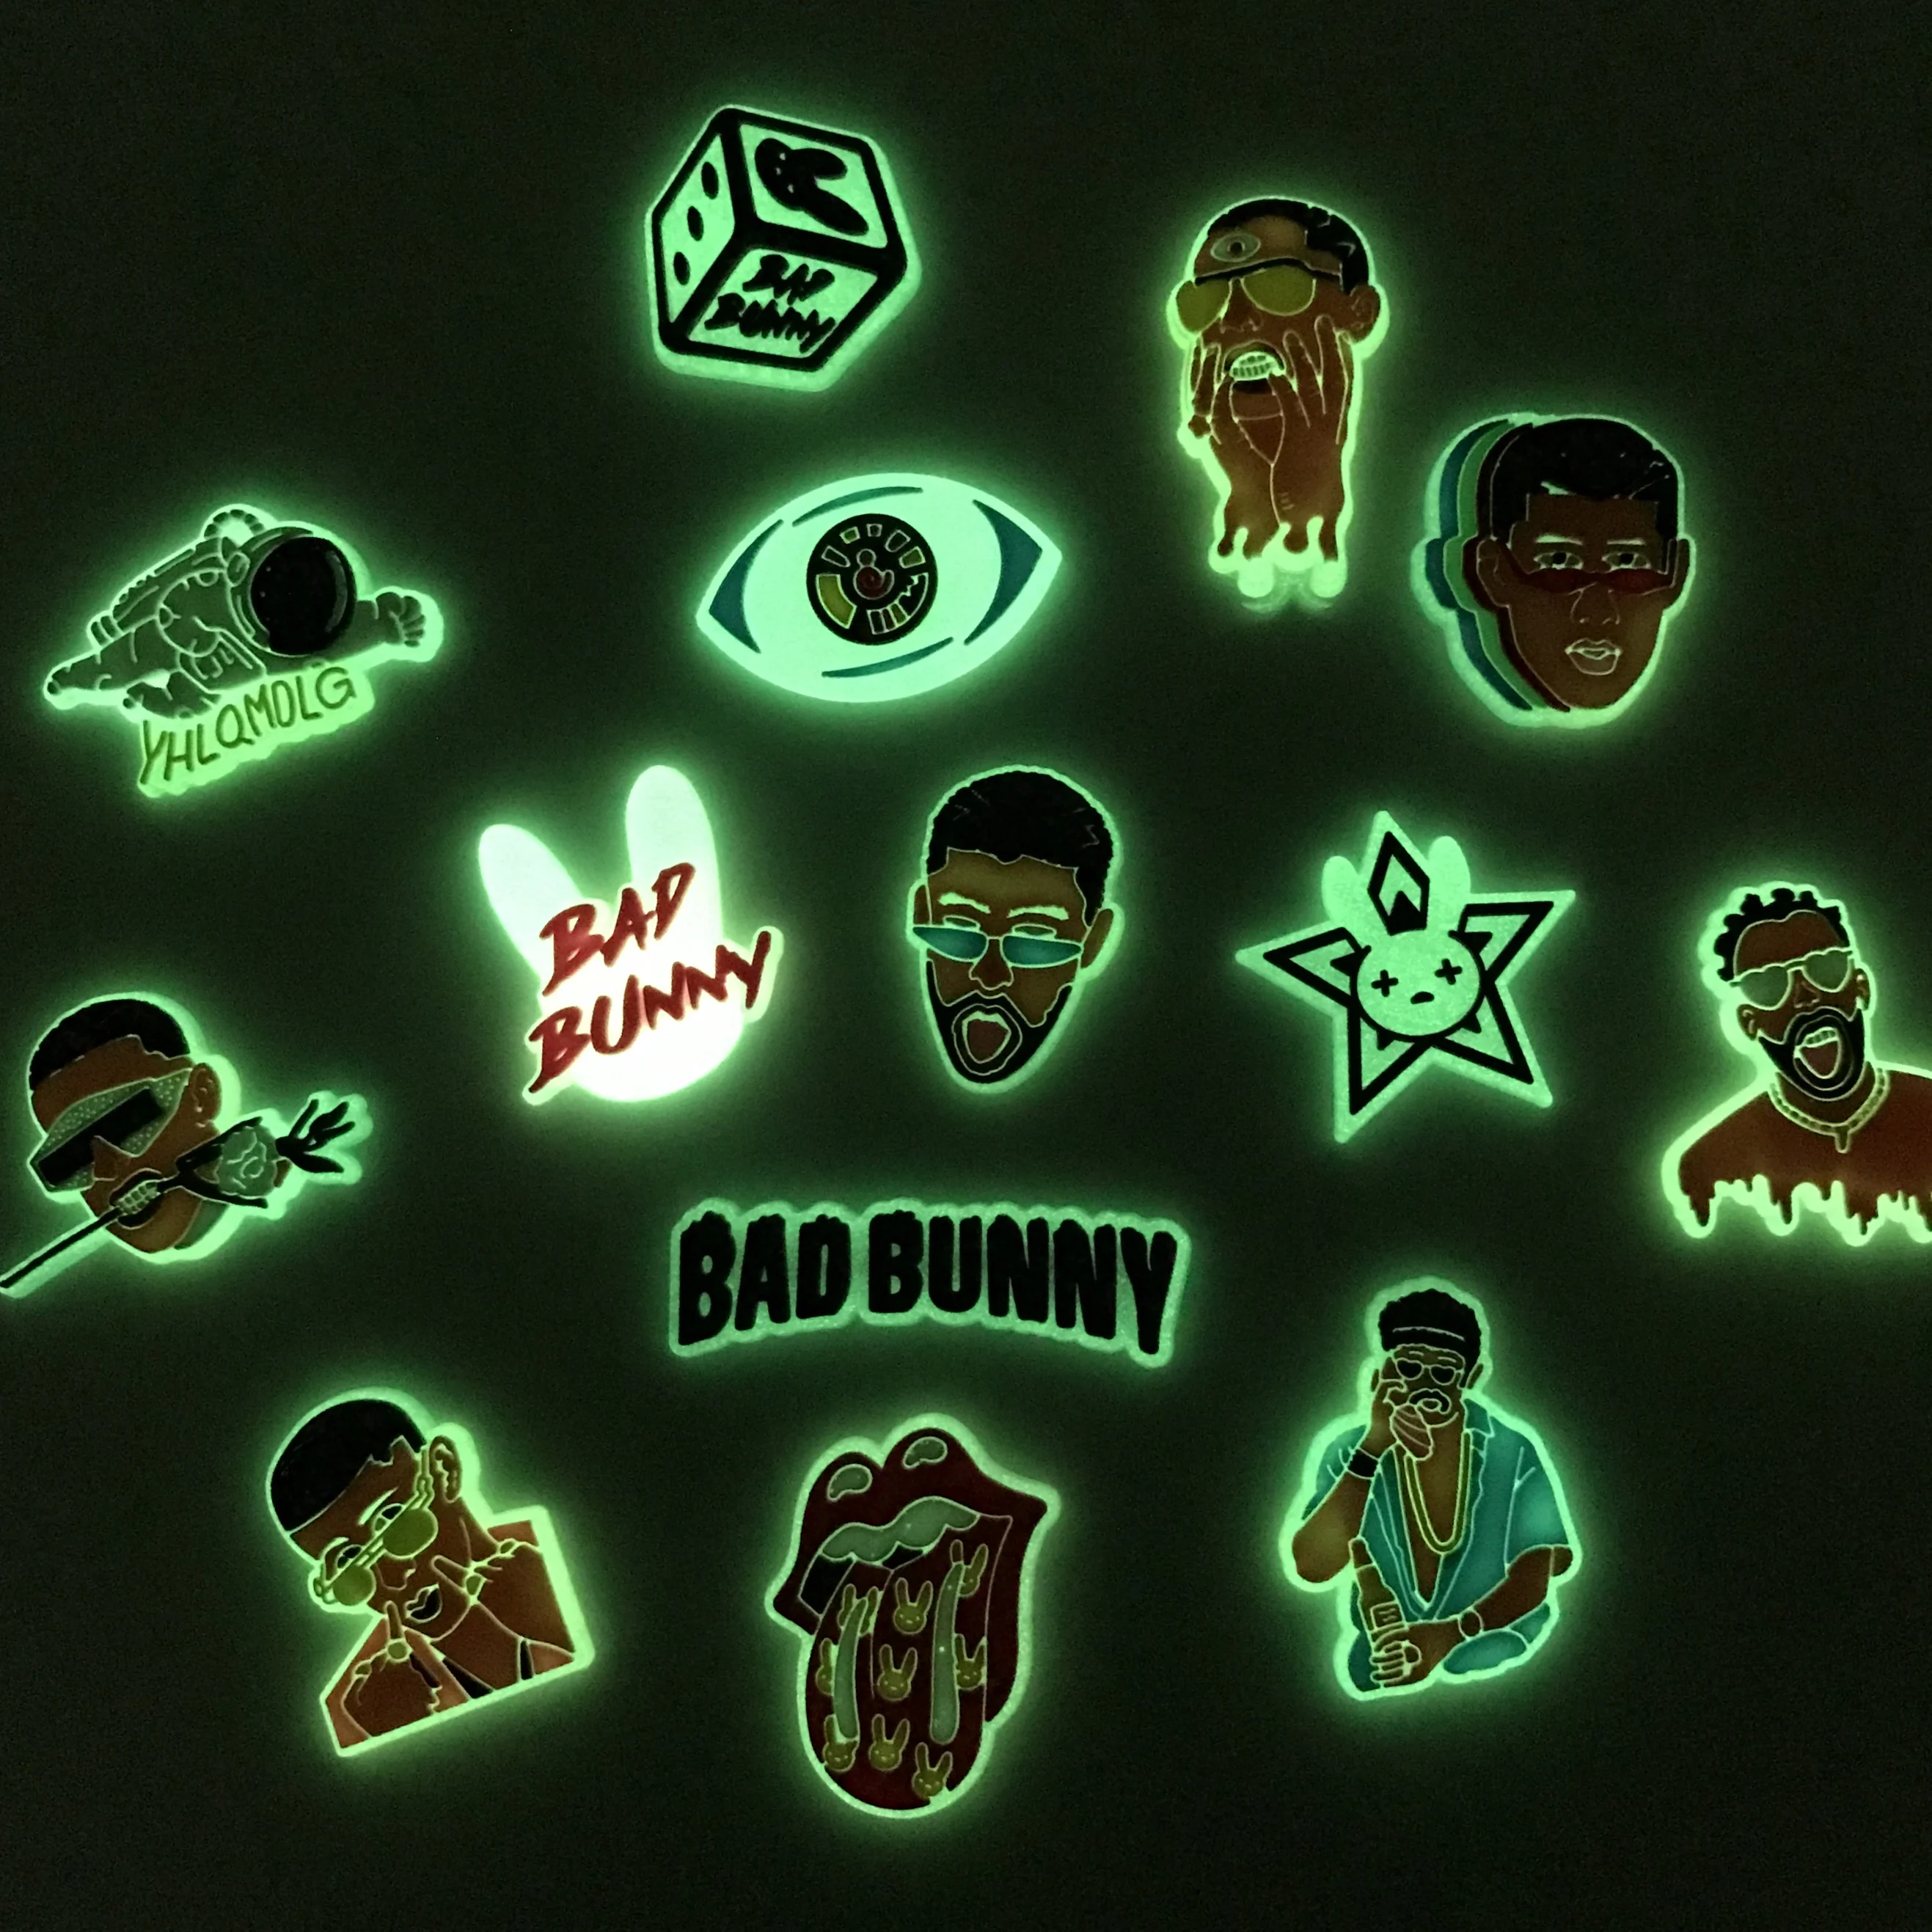 

Wholesale Custom Glow in the Dark Merry Christmas Bad Bunny Shoe Charms Accessories shoe decorations clog charms for Kids Gift, Picture